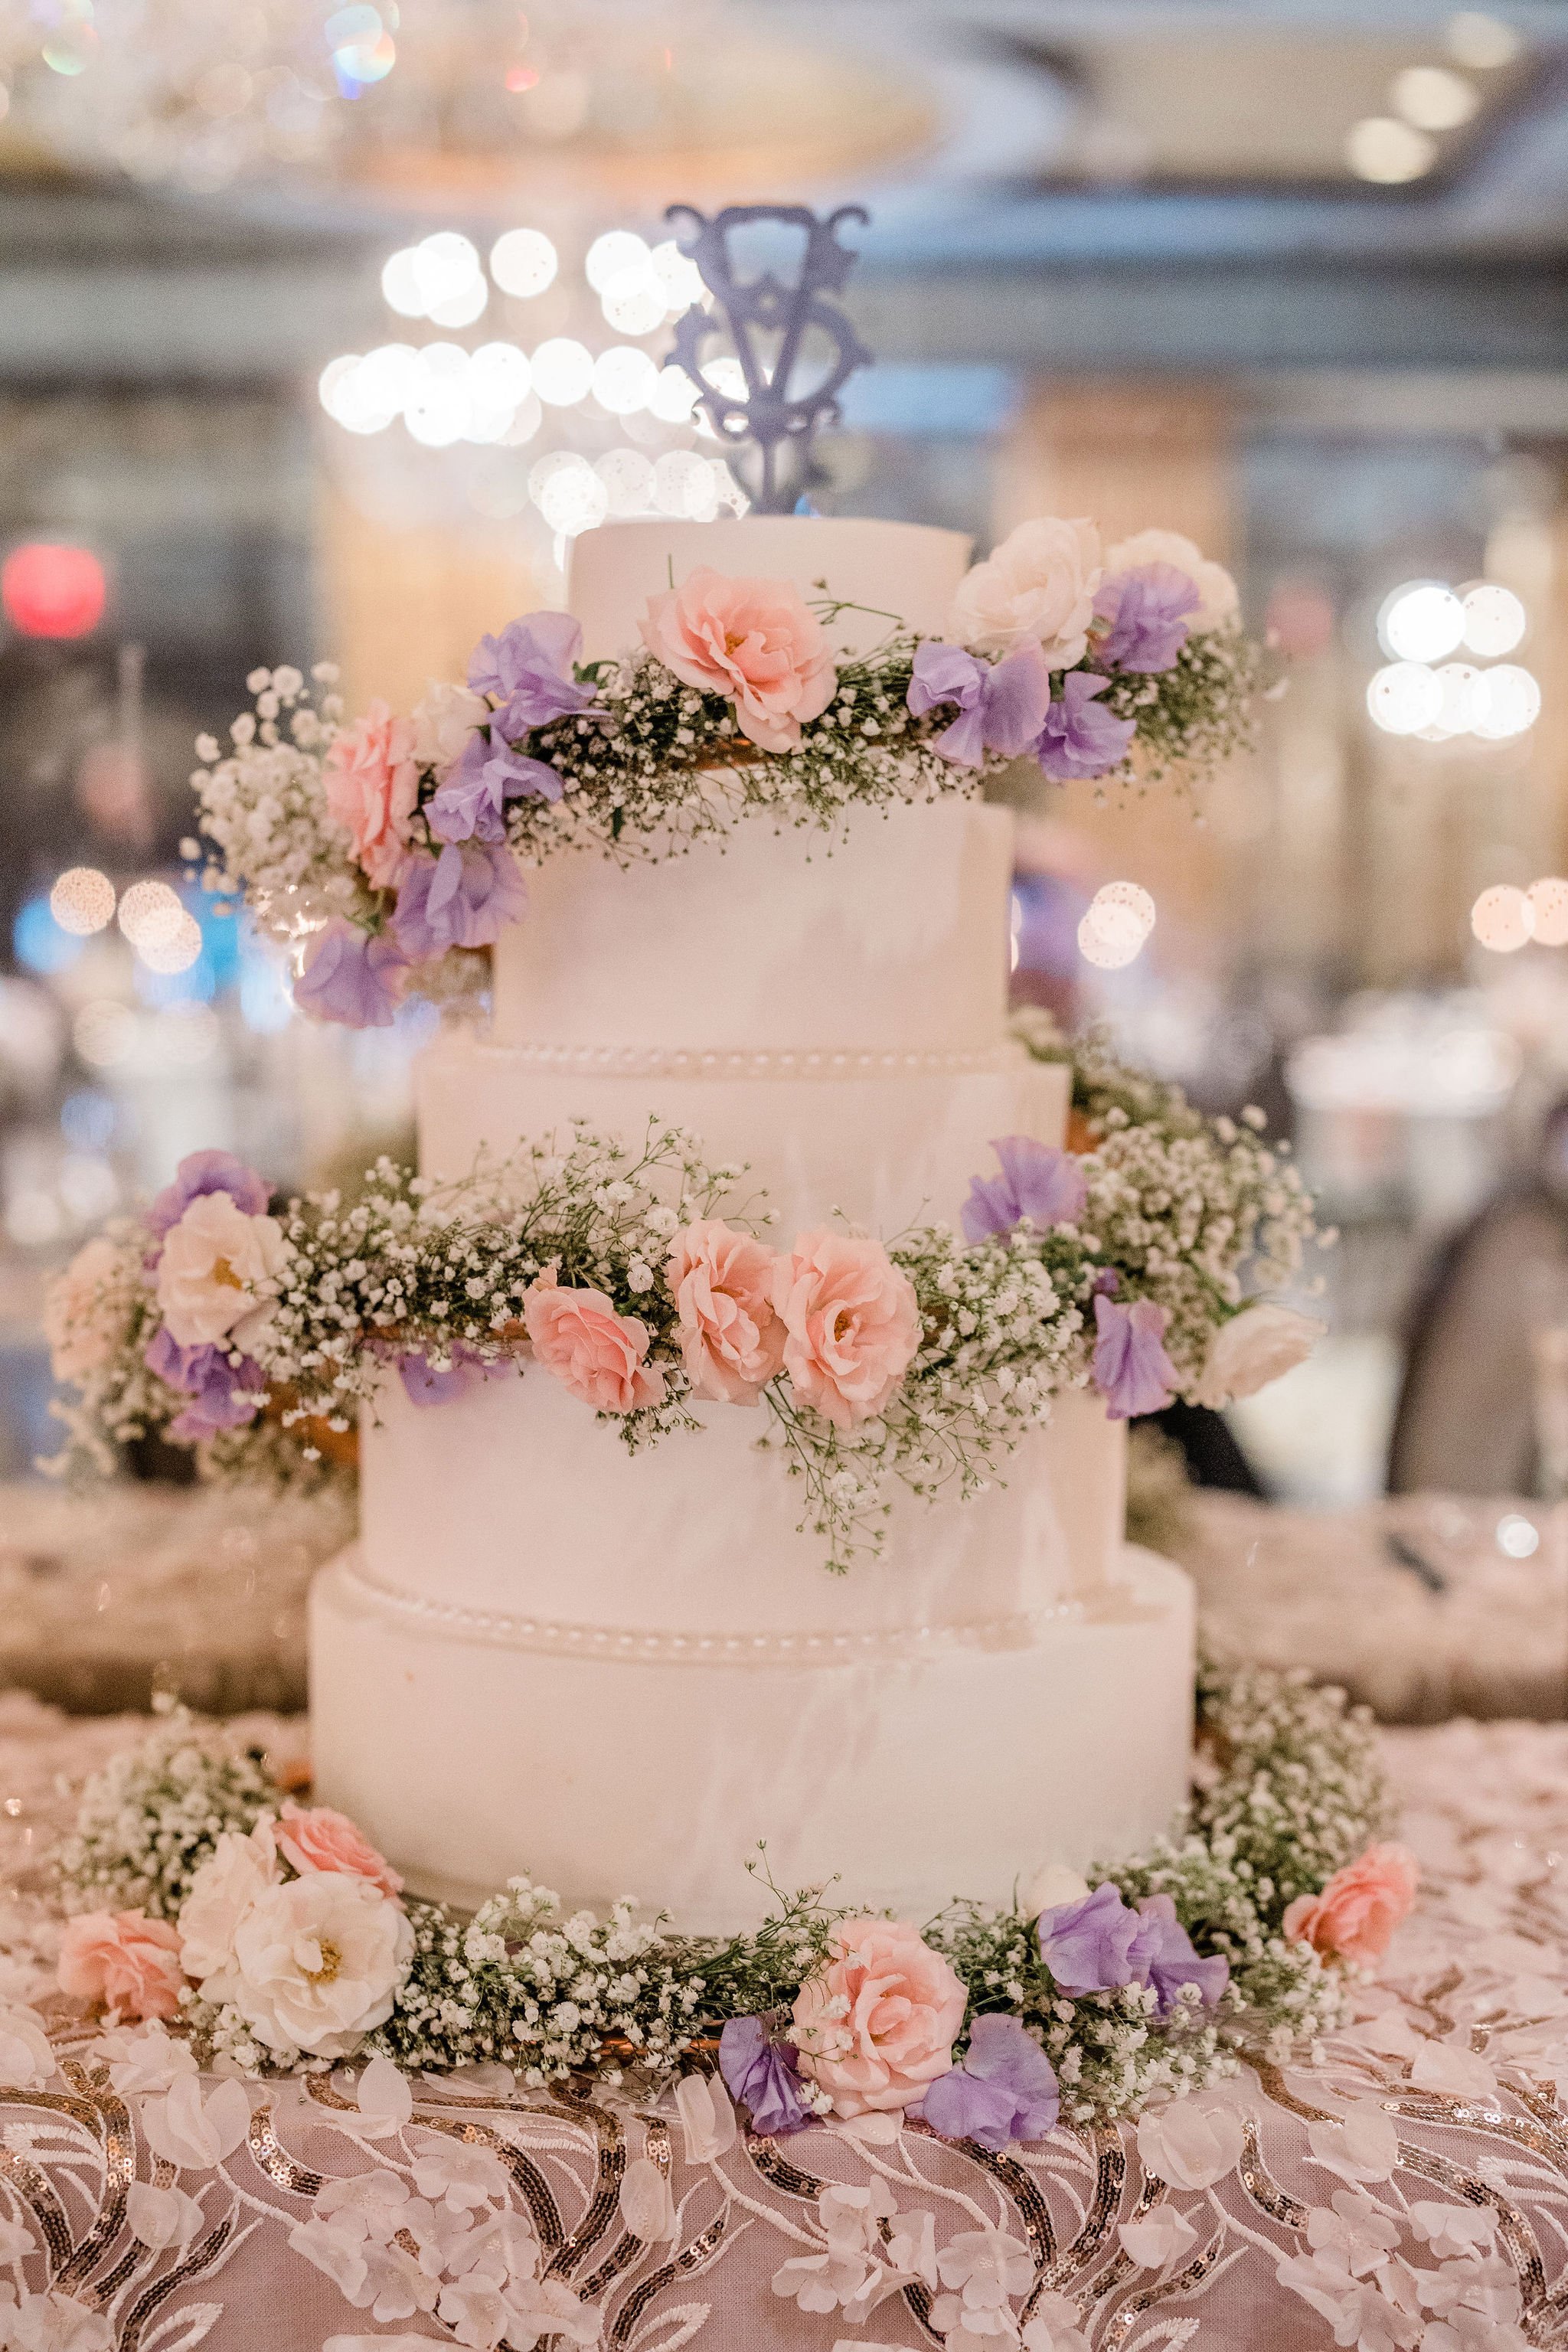 Victoria-and-stuarts-pastel-spring-wedding-at-the-forsyth-park-fountain-and-the-mansion-on-forsyth-in-savannah-georgia-planned-by-savannah-wedding-planner-and-savannah-wedding-florist-ivory-and-beau-41.JPG